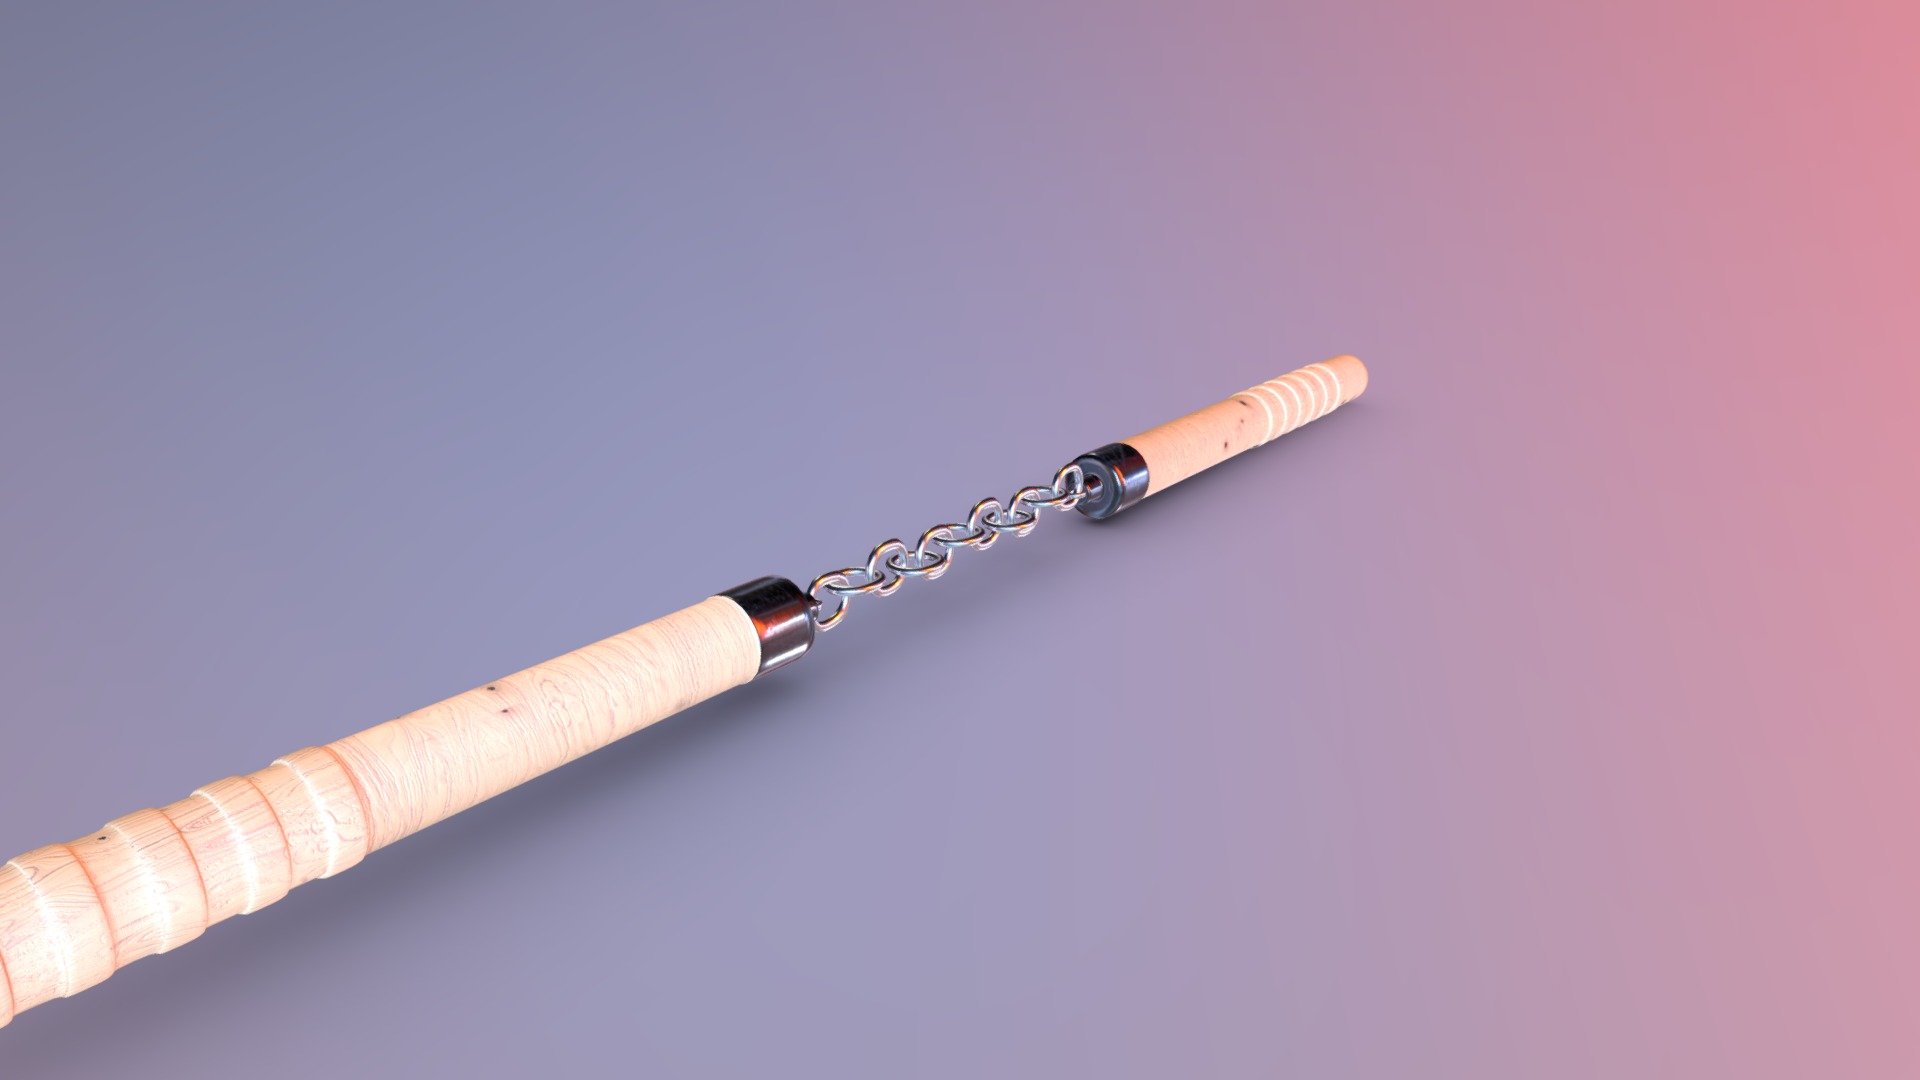 A  Highpoly Nunchucka I modelled in blender 2.9 

Follow me on instagram for all my updated posts and tutorials

https://www.instagram.com/thereal_key3d/ - Nunchuka - 3D model by Key3D (@TheRealKey3D) 3d model